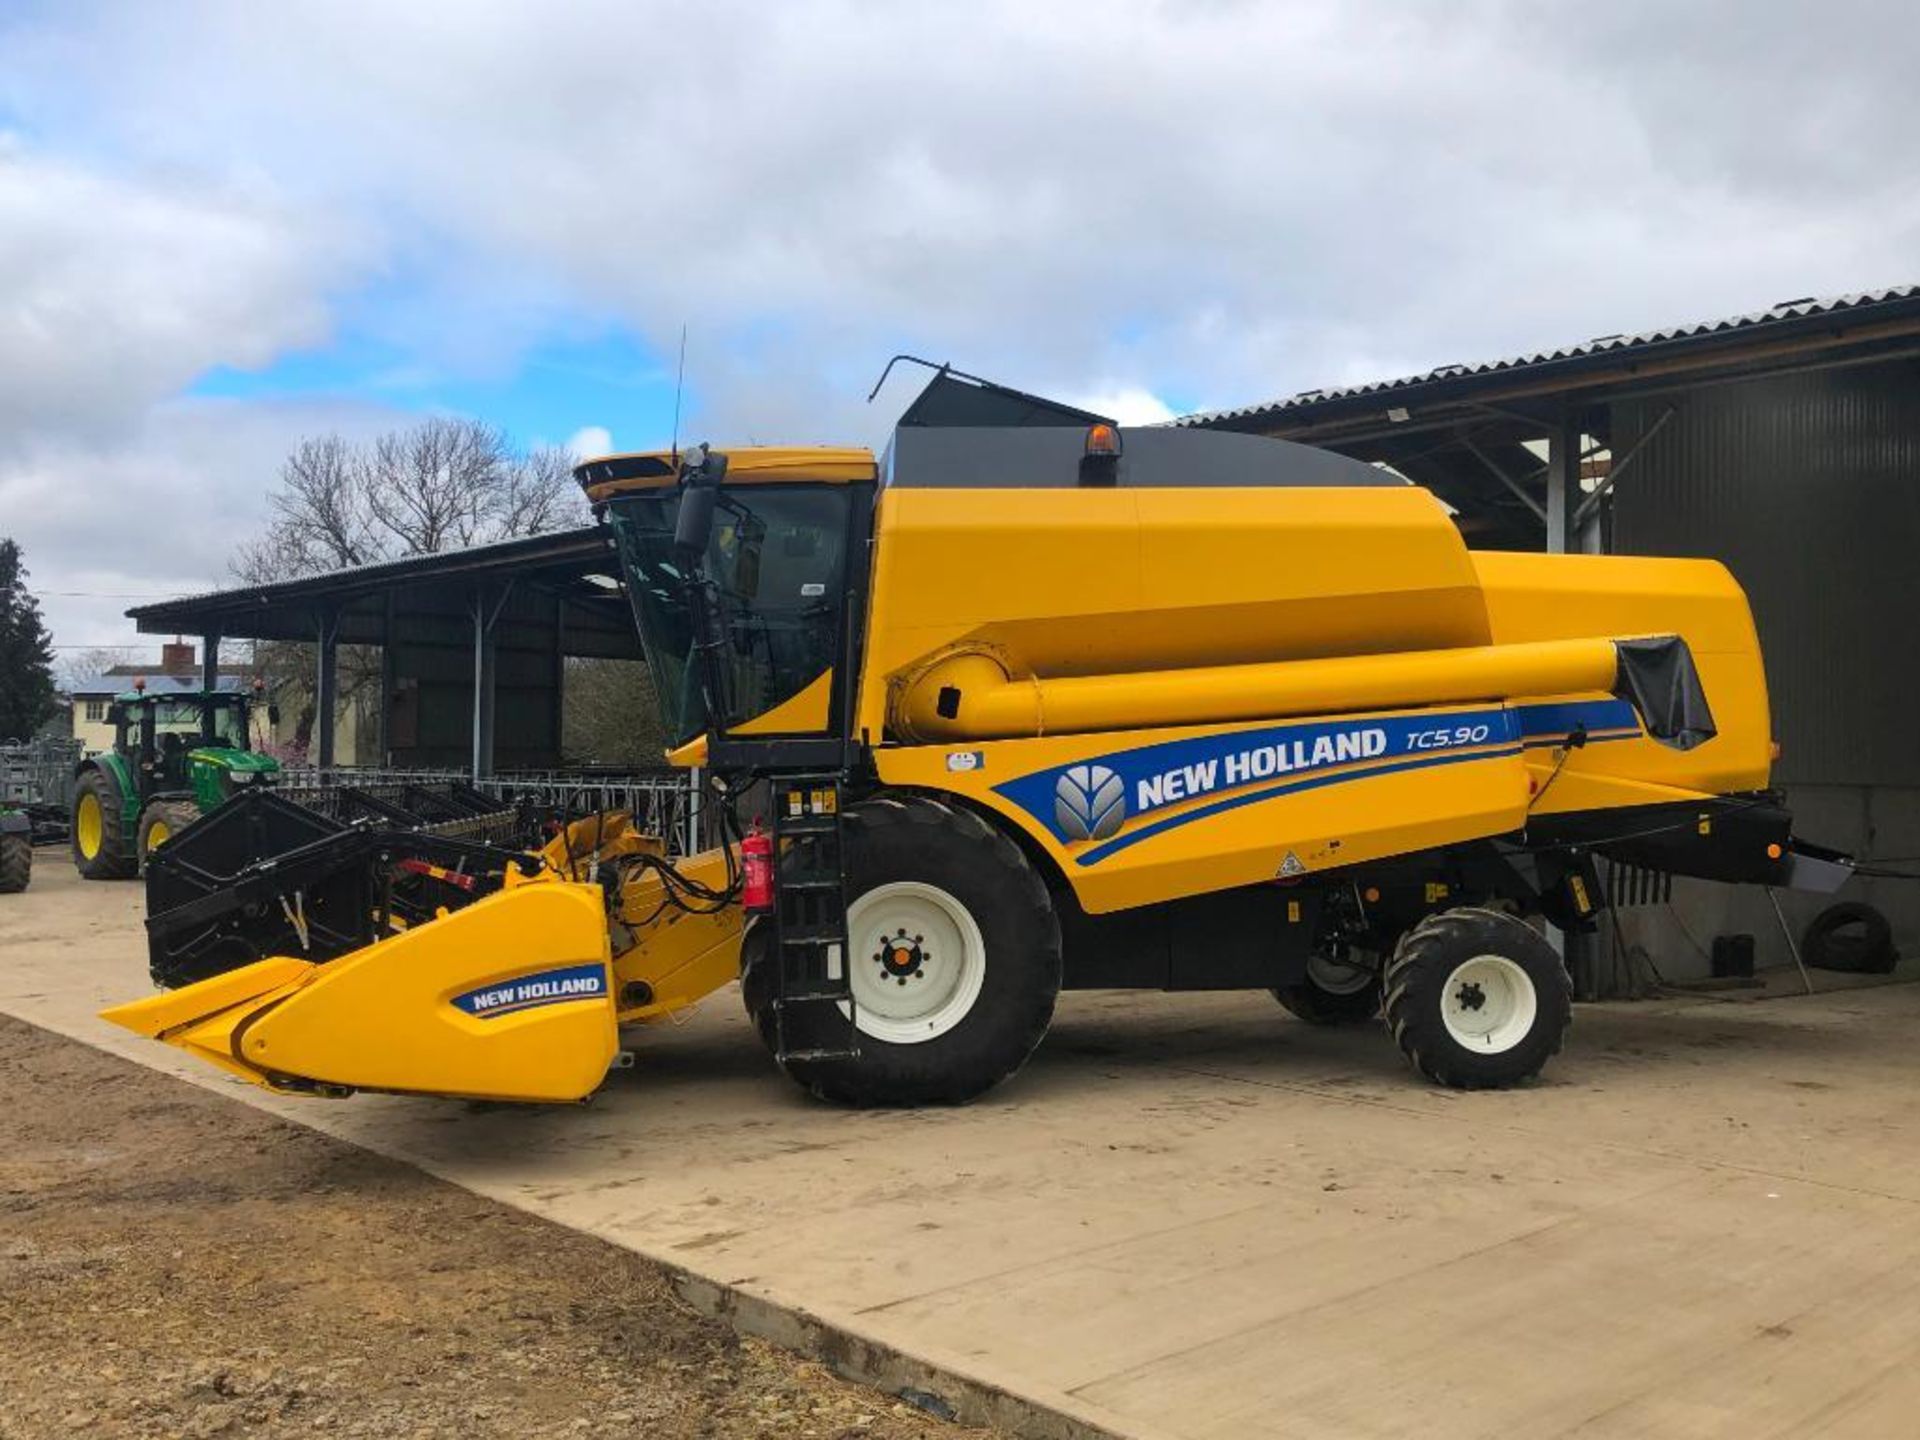 2018 New Holland TC5.90 combine harvester with straw chopper and Ceres 8000i grain monitoring system - Image 3 of 35